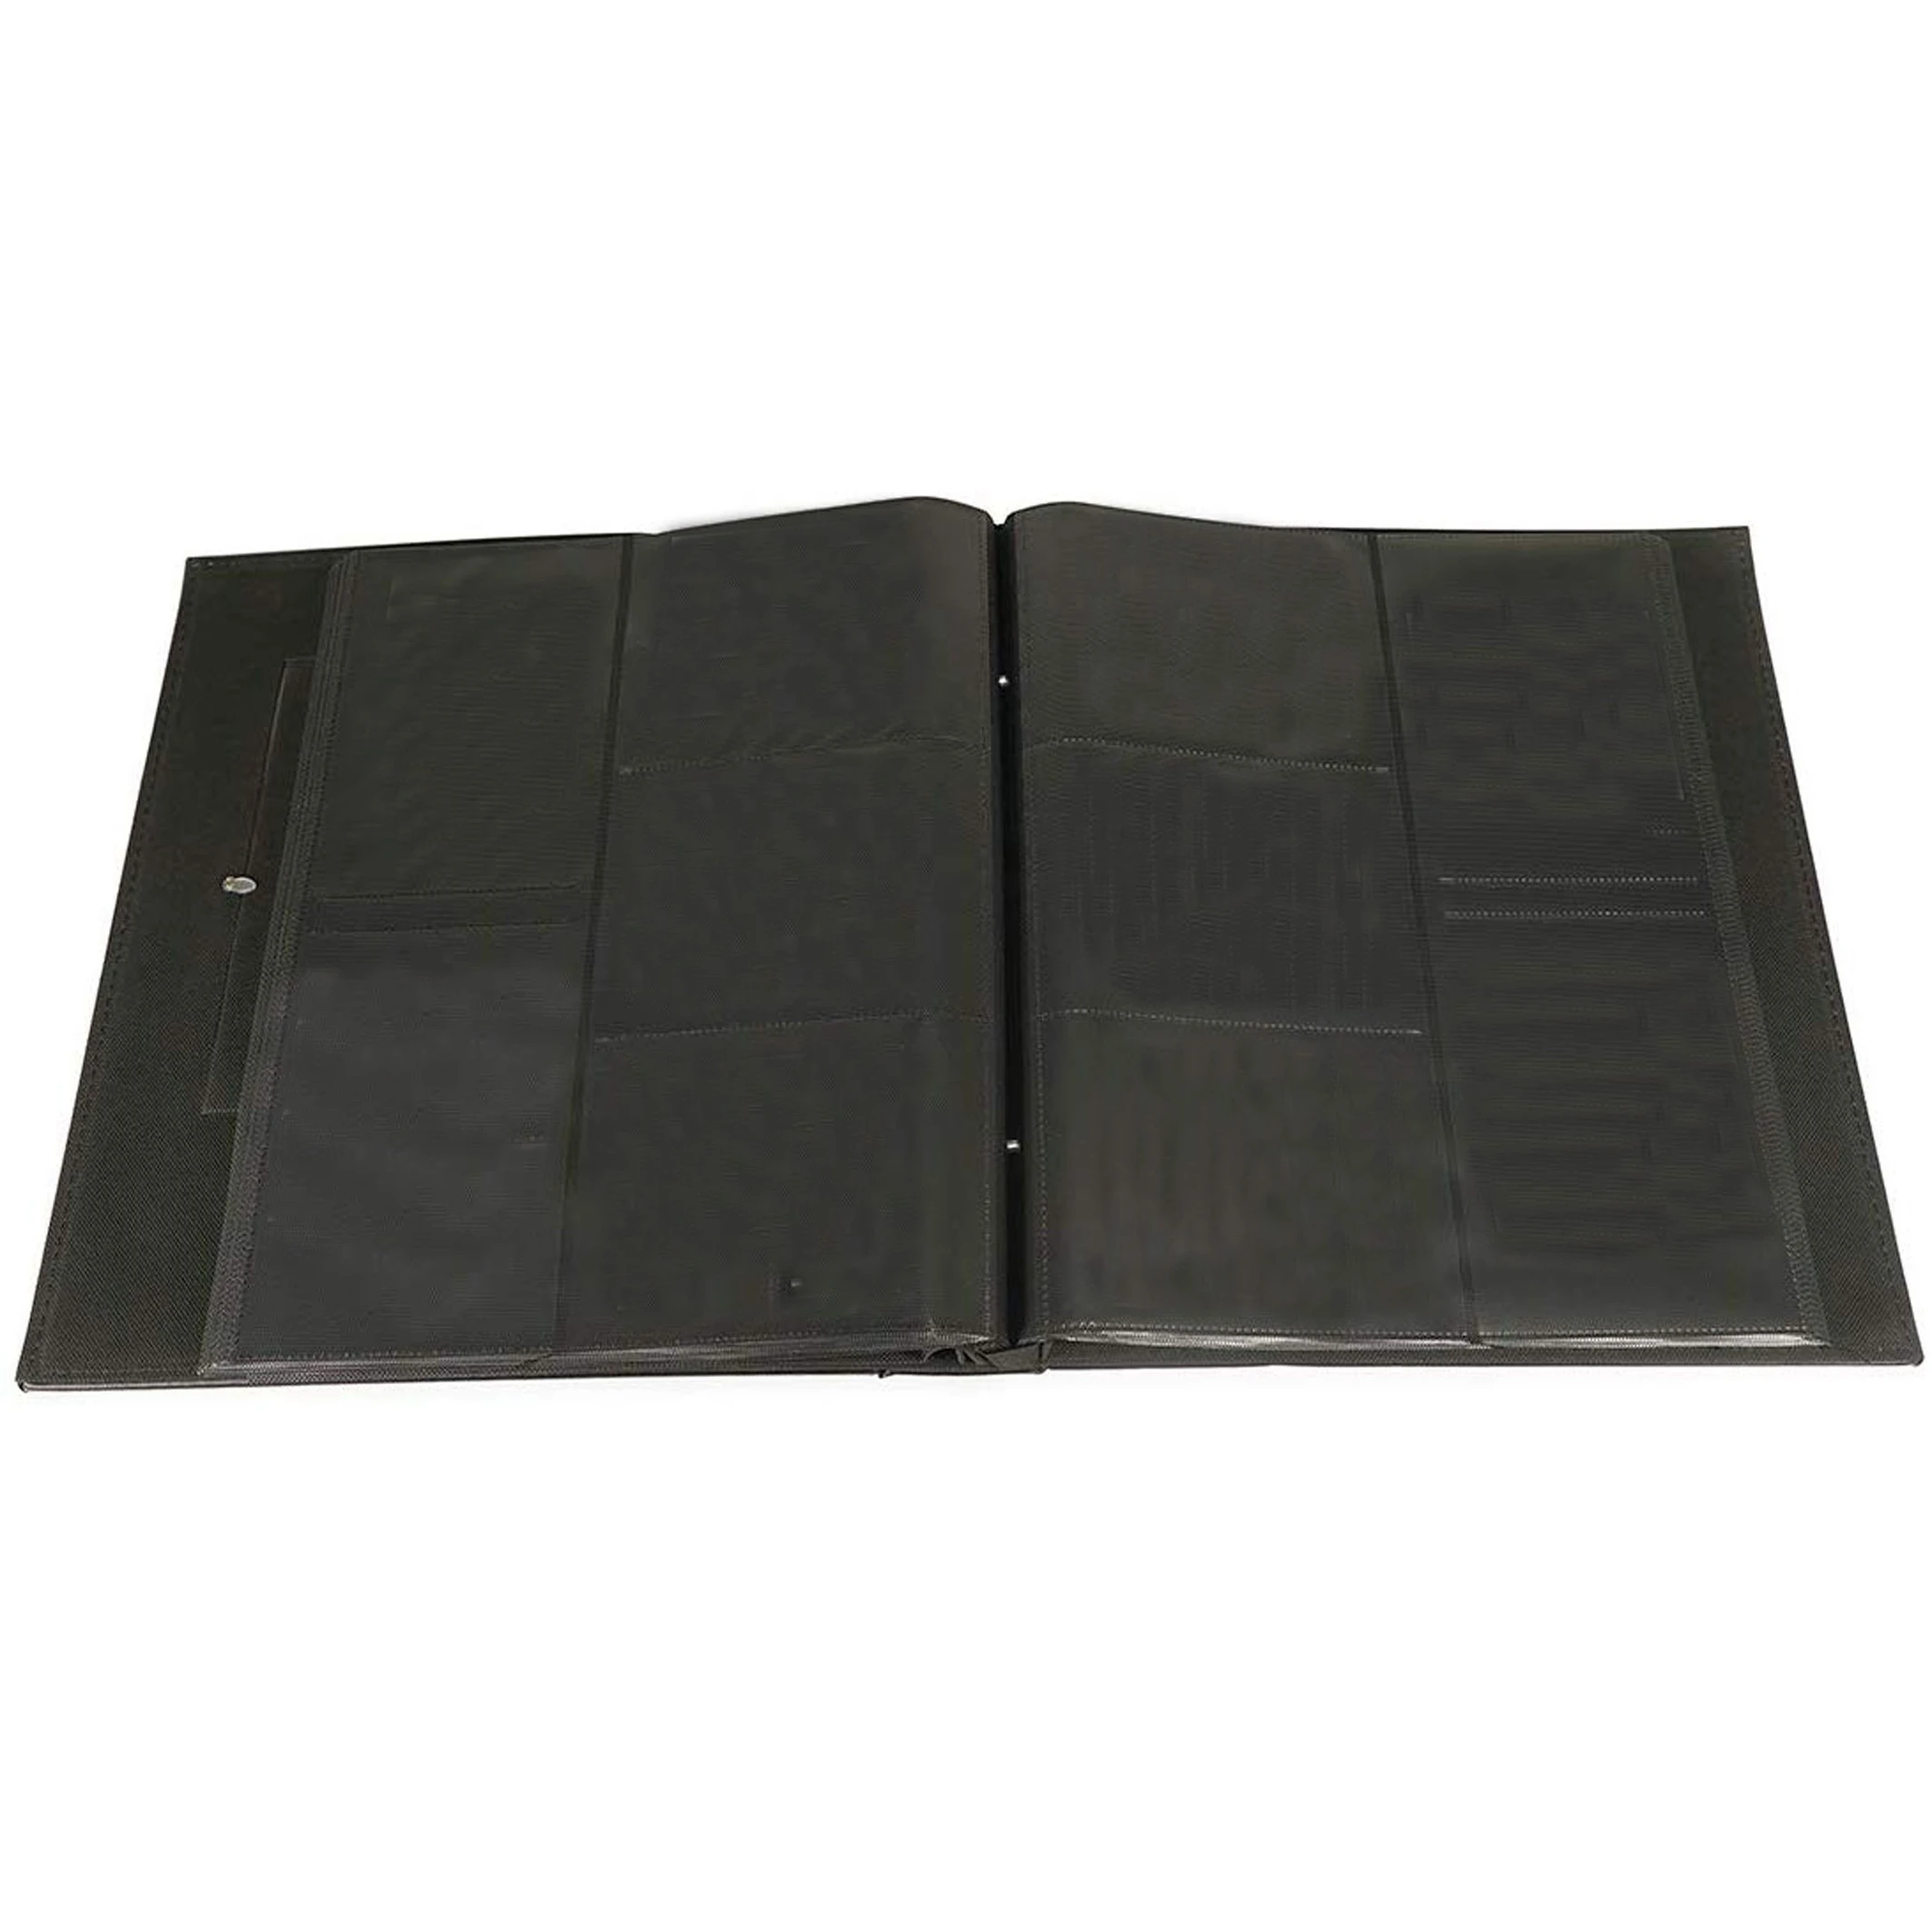 Extra Large Capacity Leather Cover Wedding Family Photo Albums Holds 500 4x6 Photos